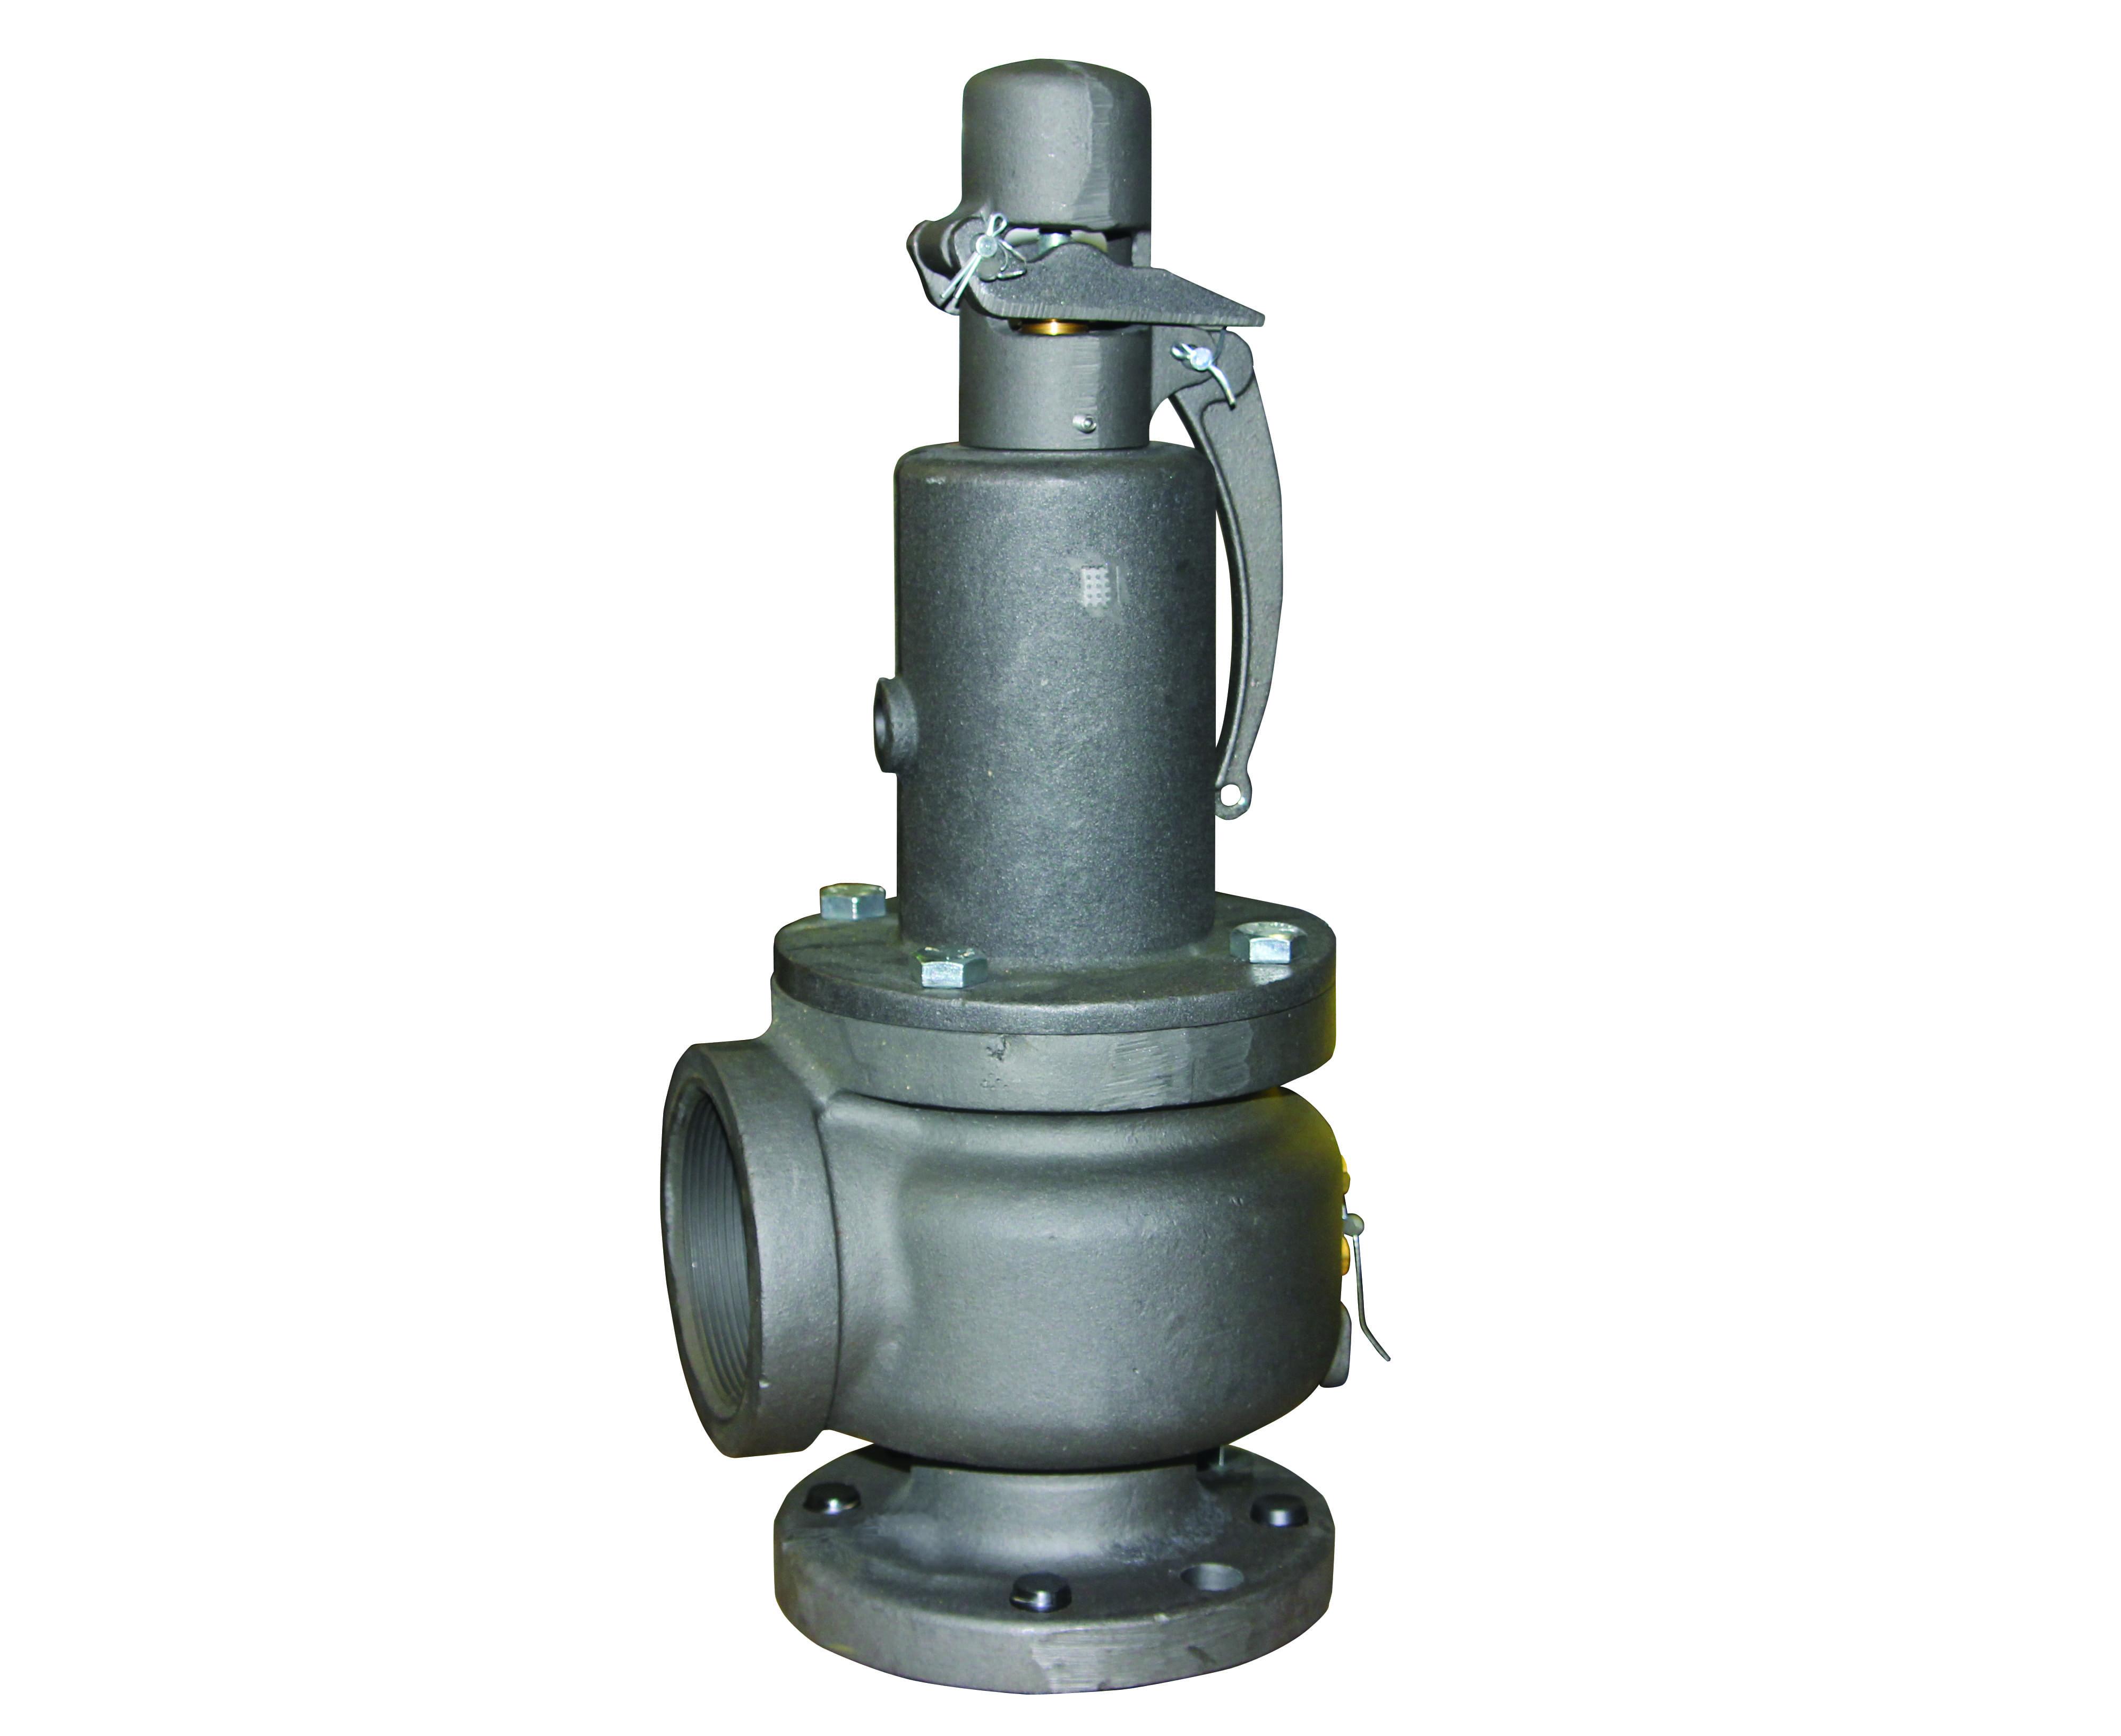 Preview image for Apollo ASME Section VIII Steam Cast Iron Safety Relief Valve, 2-1/2" x 4" (Flange x FNPT)